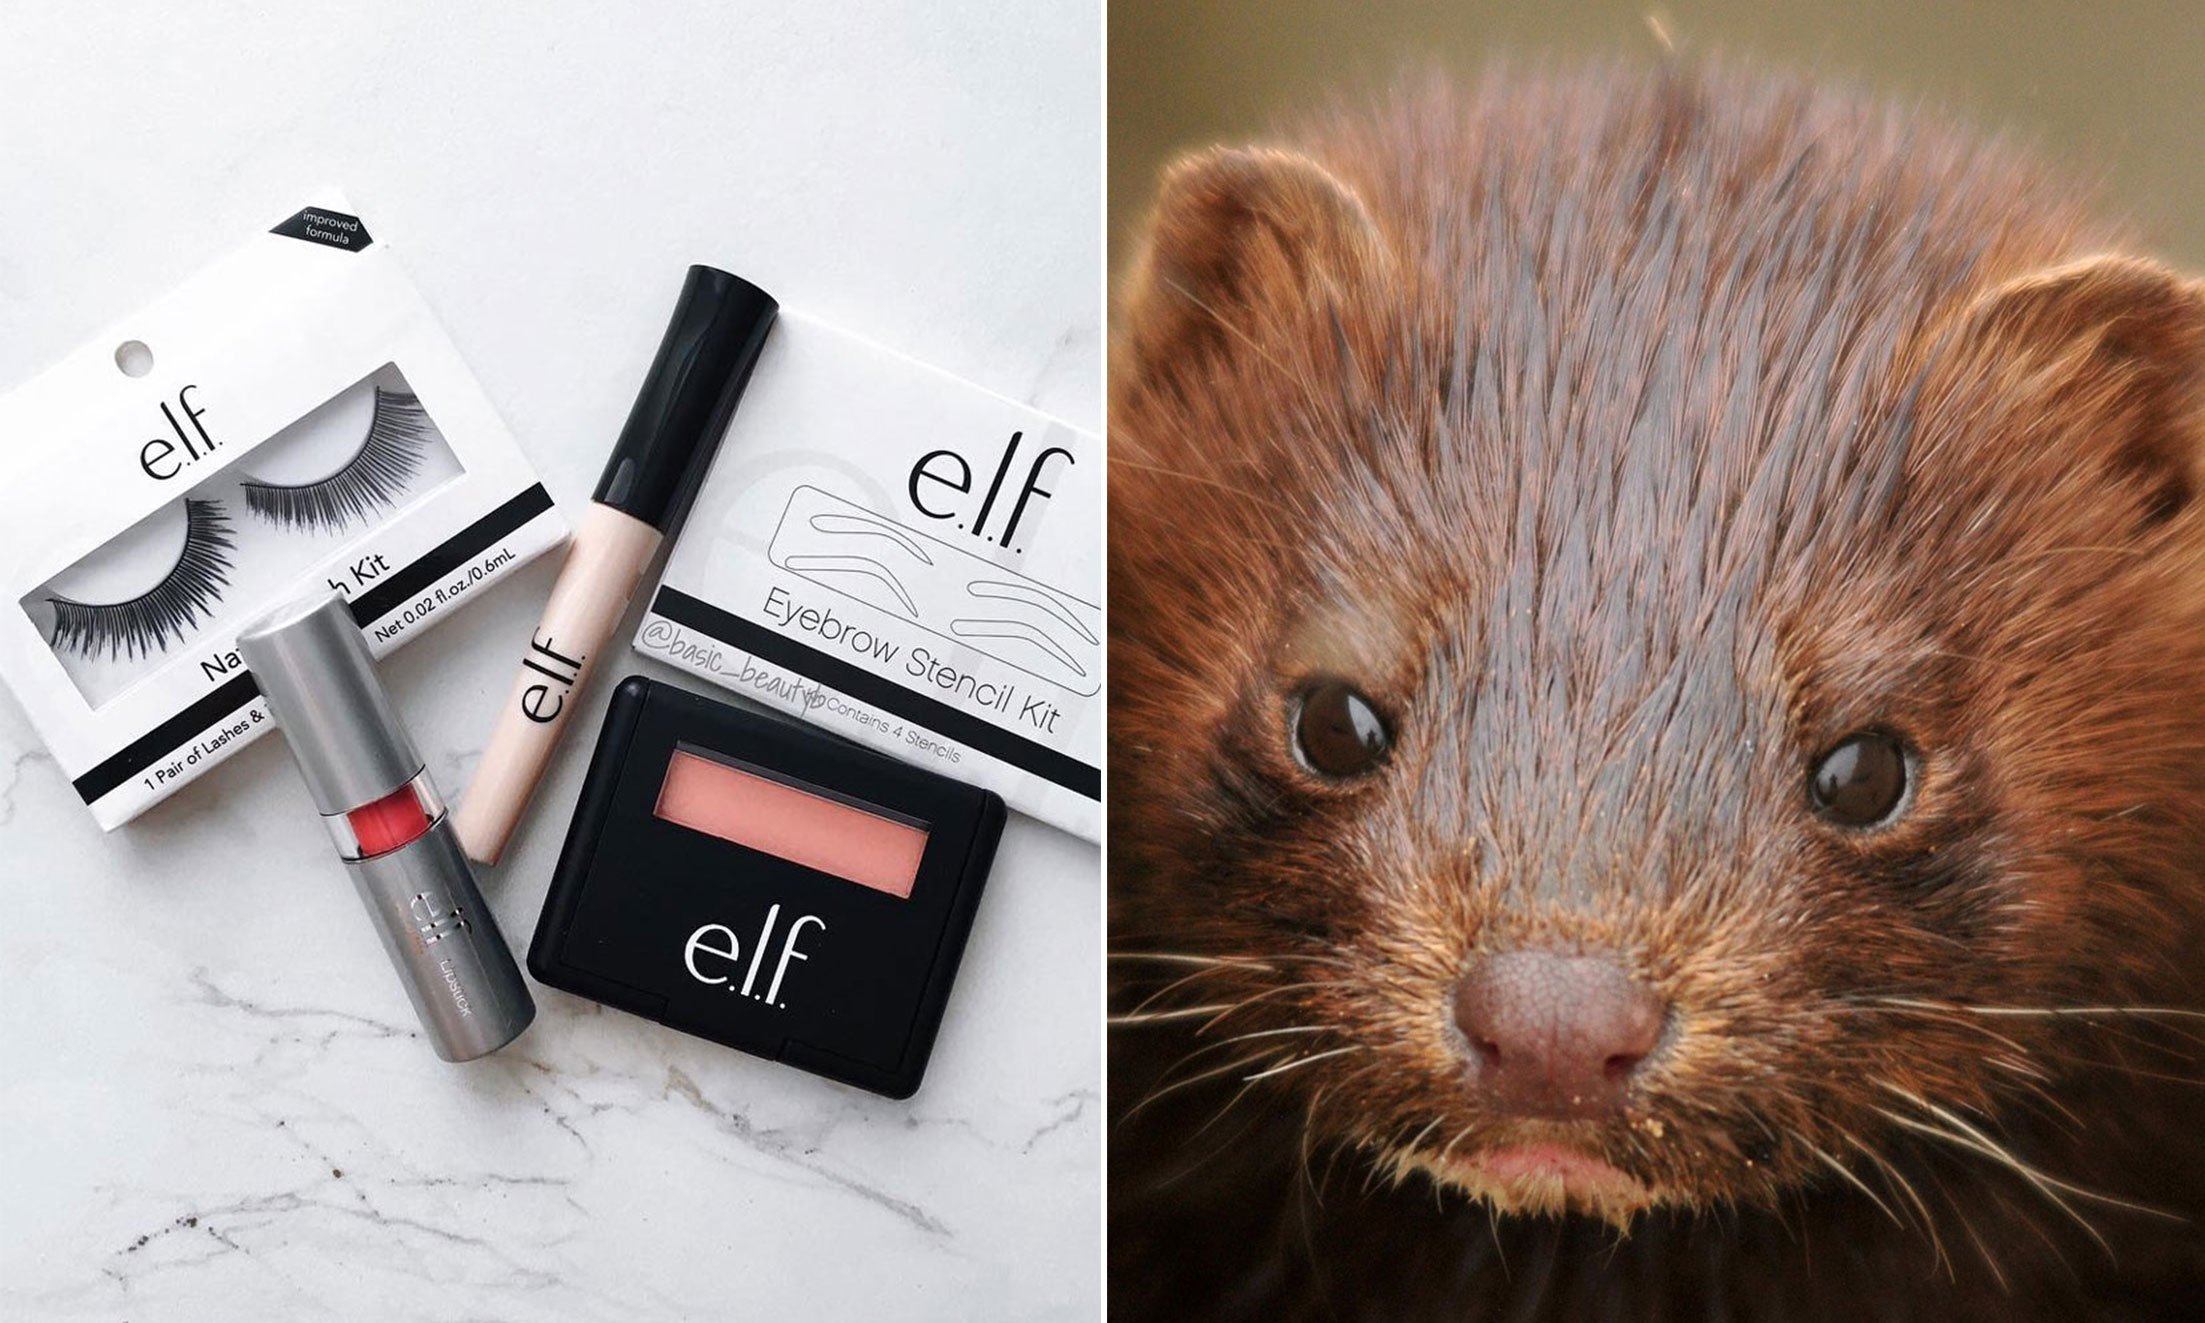 Is Cosmetics Cruelty-Free? Check the Facts | PETA